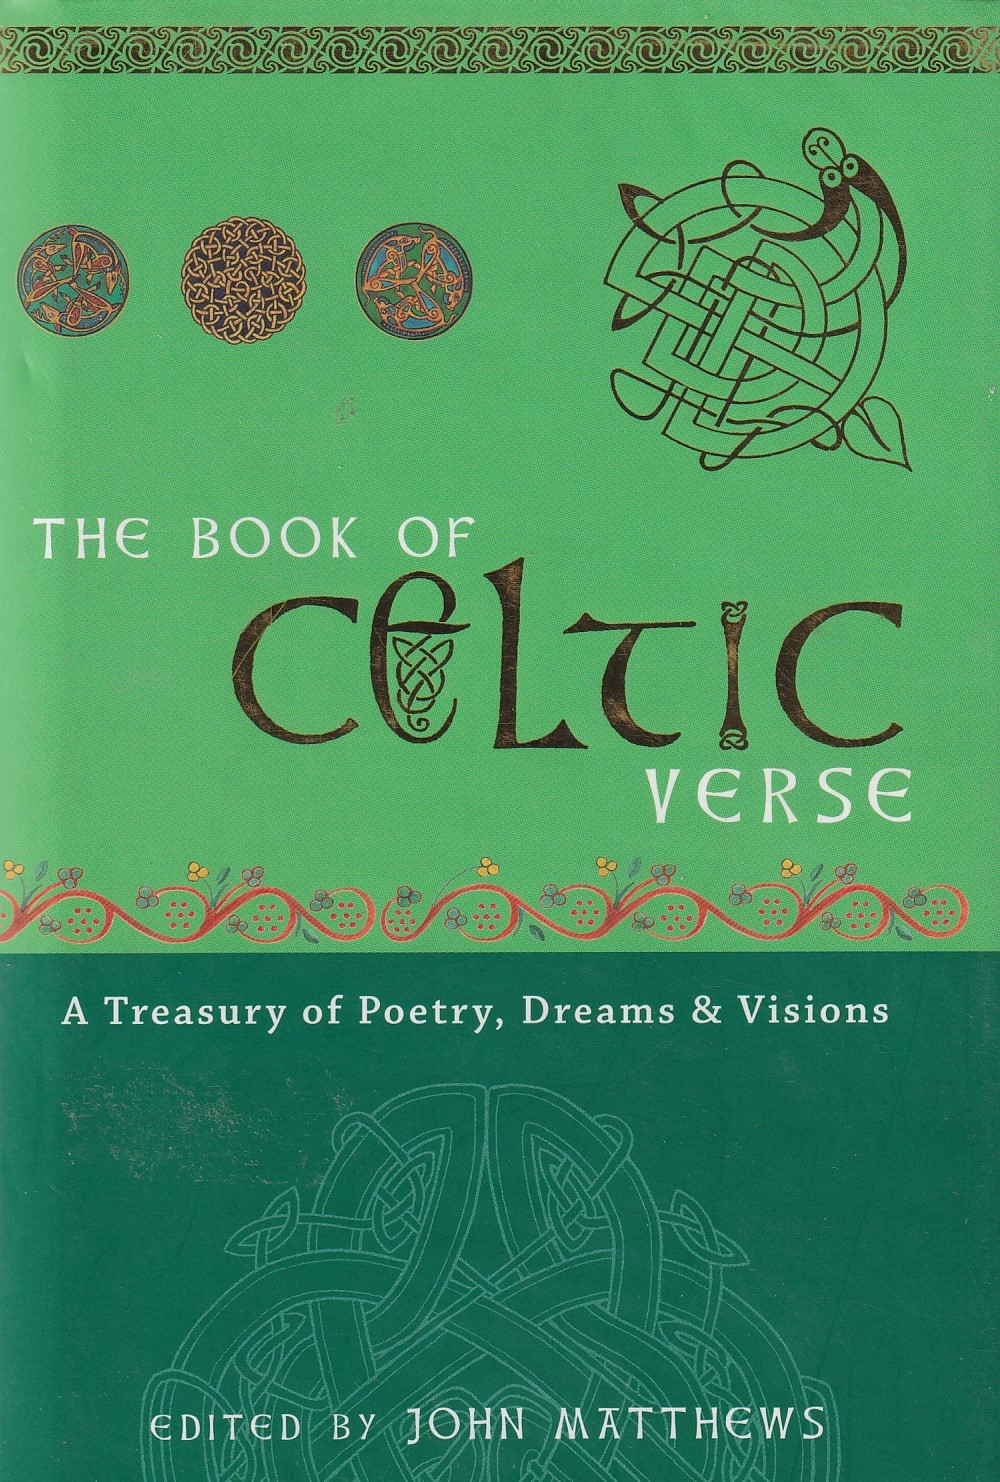 The Book of Celtic Verse: A Treasury of Poetry, Dreams & Visions | Matthews, John ed. | Charlie Byrne's